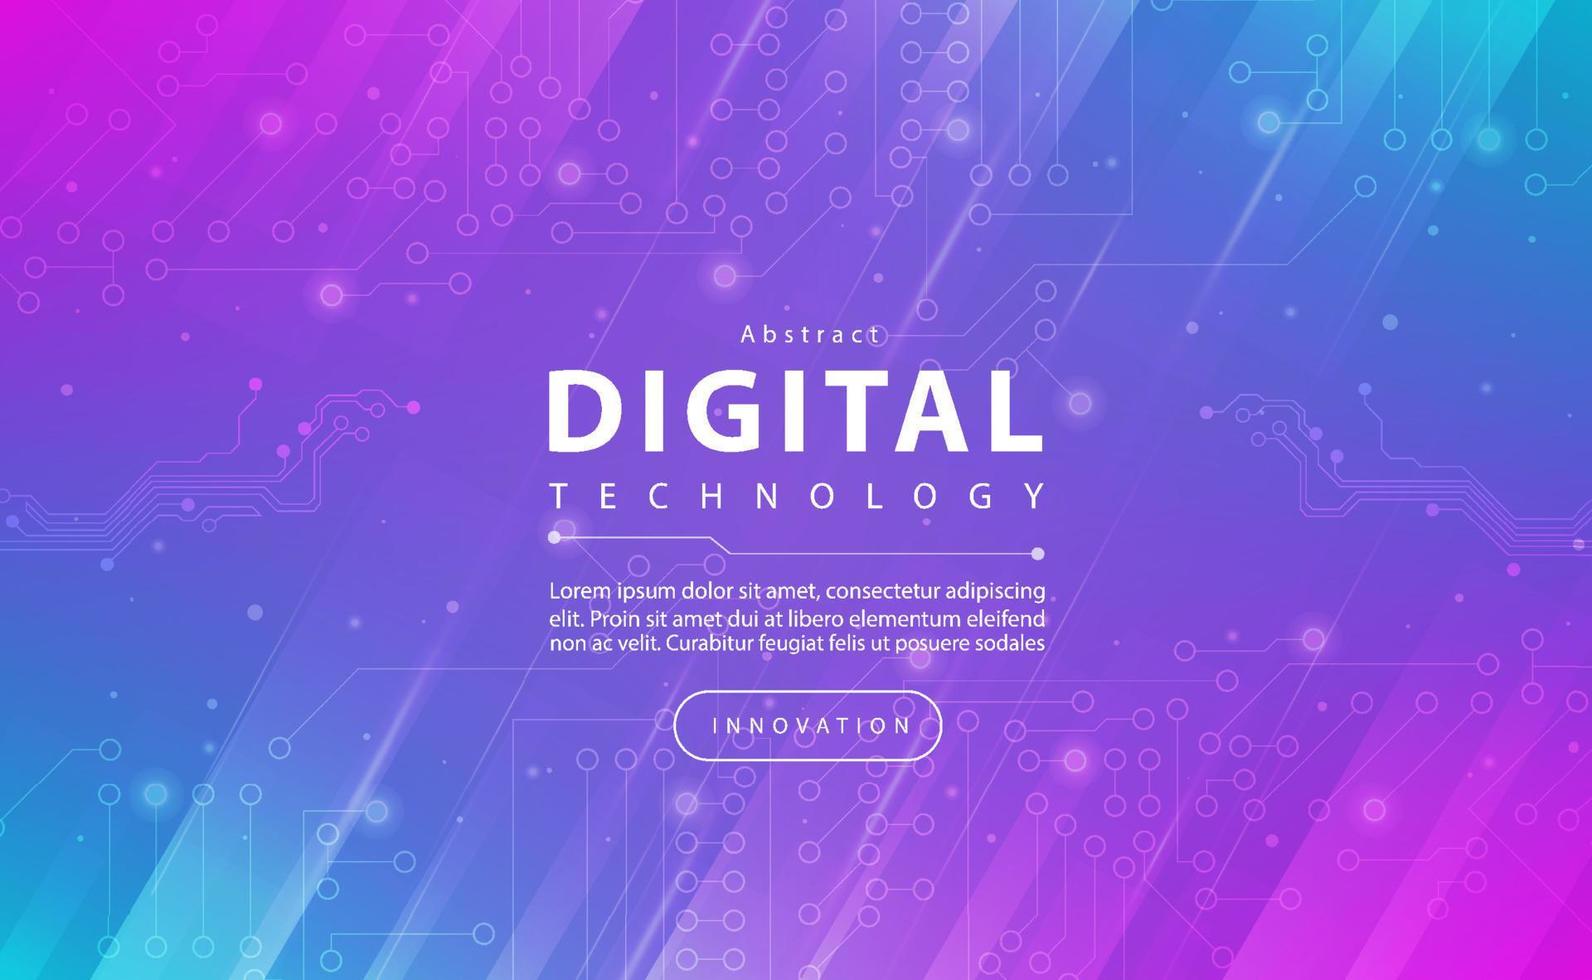 Digital technology banner pink blue background concept, technology light purple effect, abstract tech, innovation future data, internet network, Ai big data, lines dots connection, illustration vector